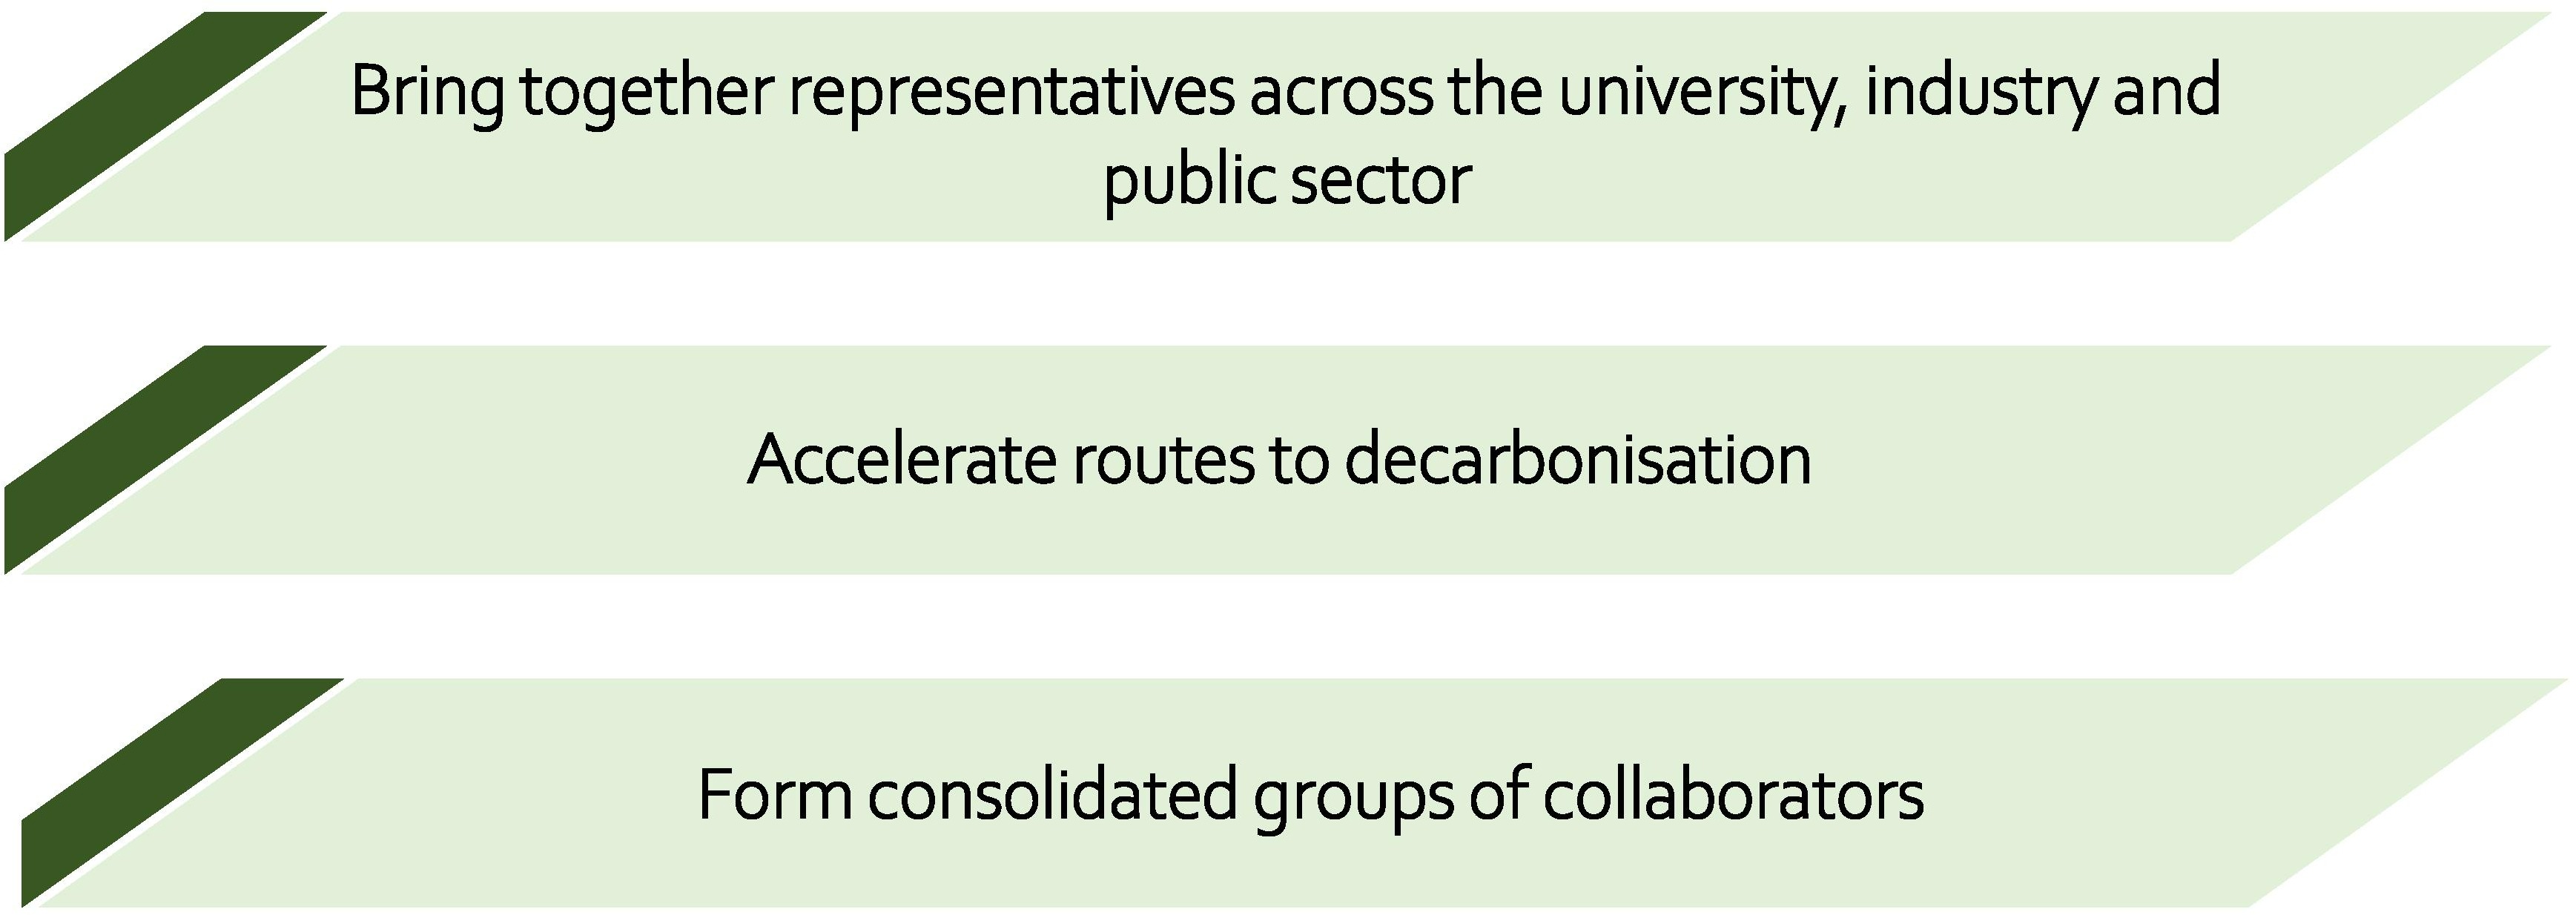 Aims: Bring together representatives across the university, industry and public sector; Accelerate routes to decarbonisation; Form consolidated groups of collaborators